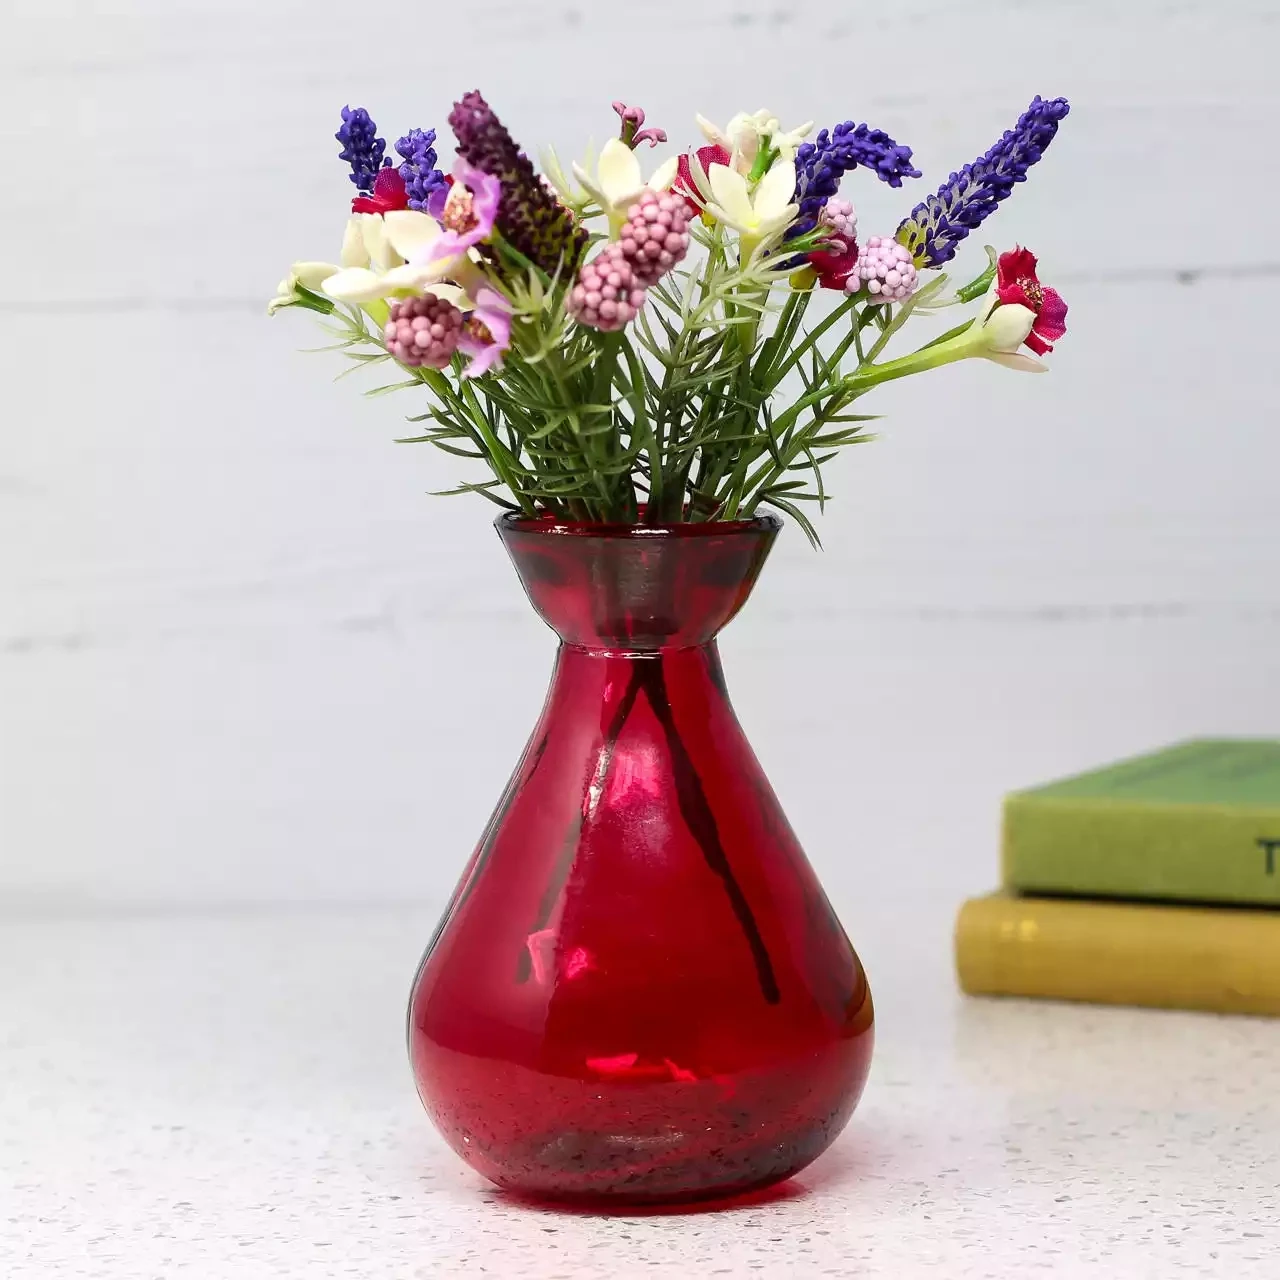 Recycled Glass Bud Vase - Red by Jarapa